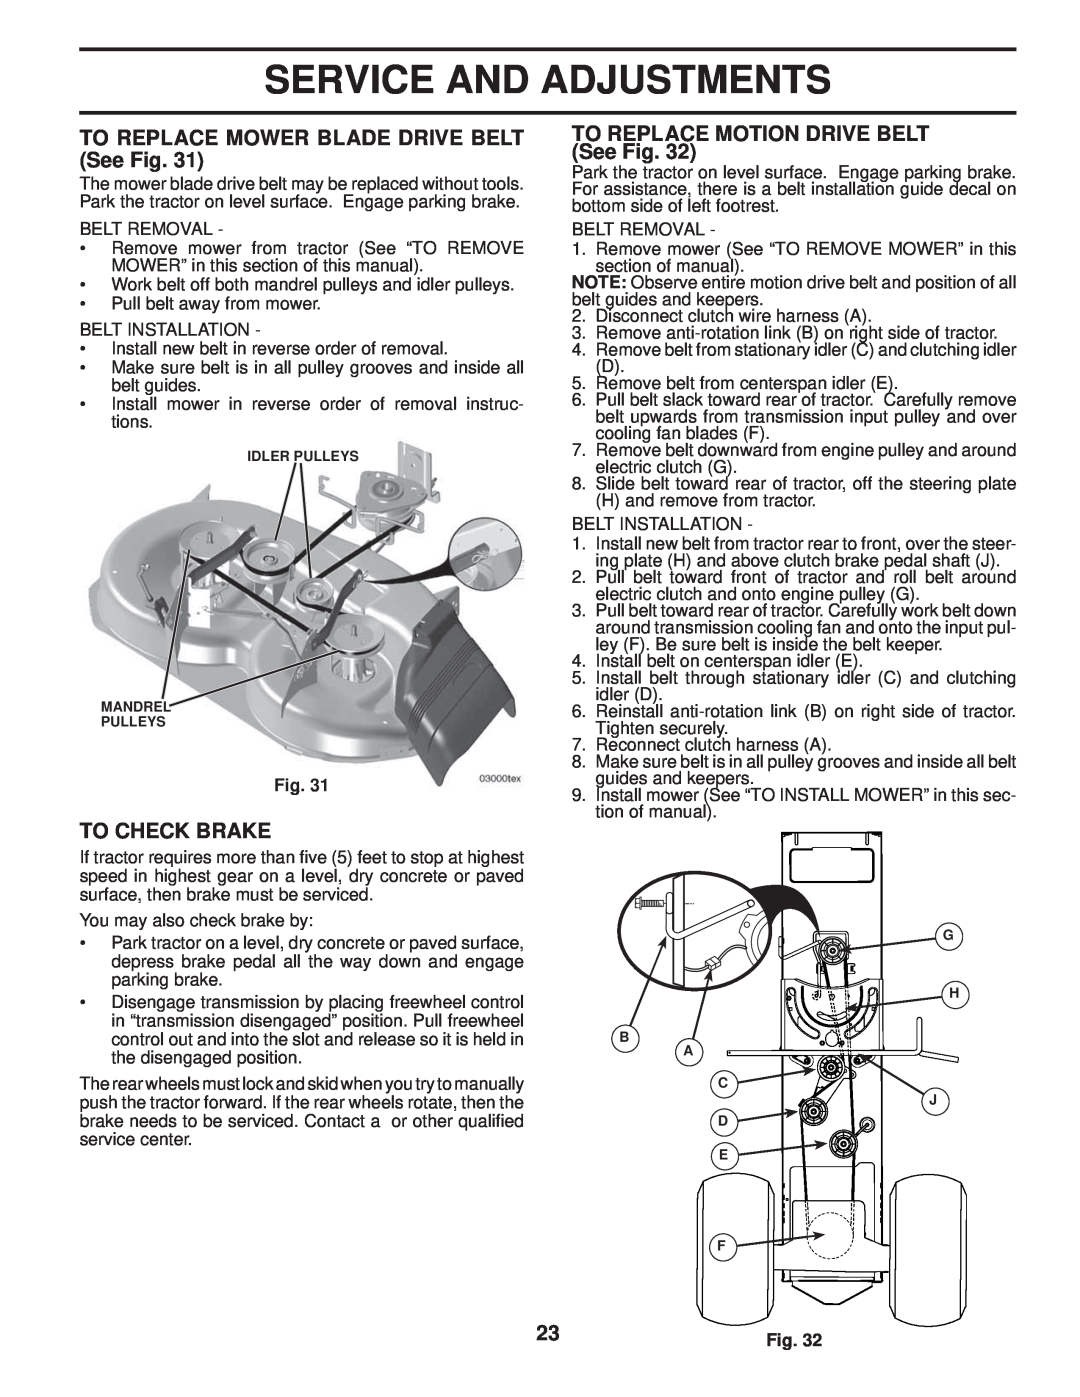 Husqvarna LTH1742T manual TO REPLACE MOWER BLADE DRIVE BELT See Fig, To Check Brake, TO REPLACE MOTION DRIVE BELT See Fig 